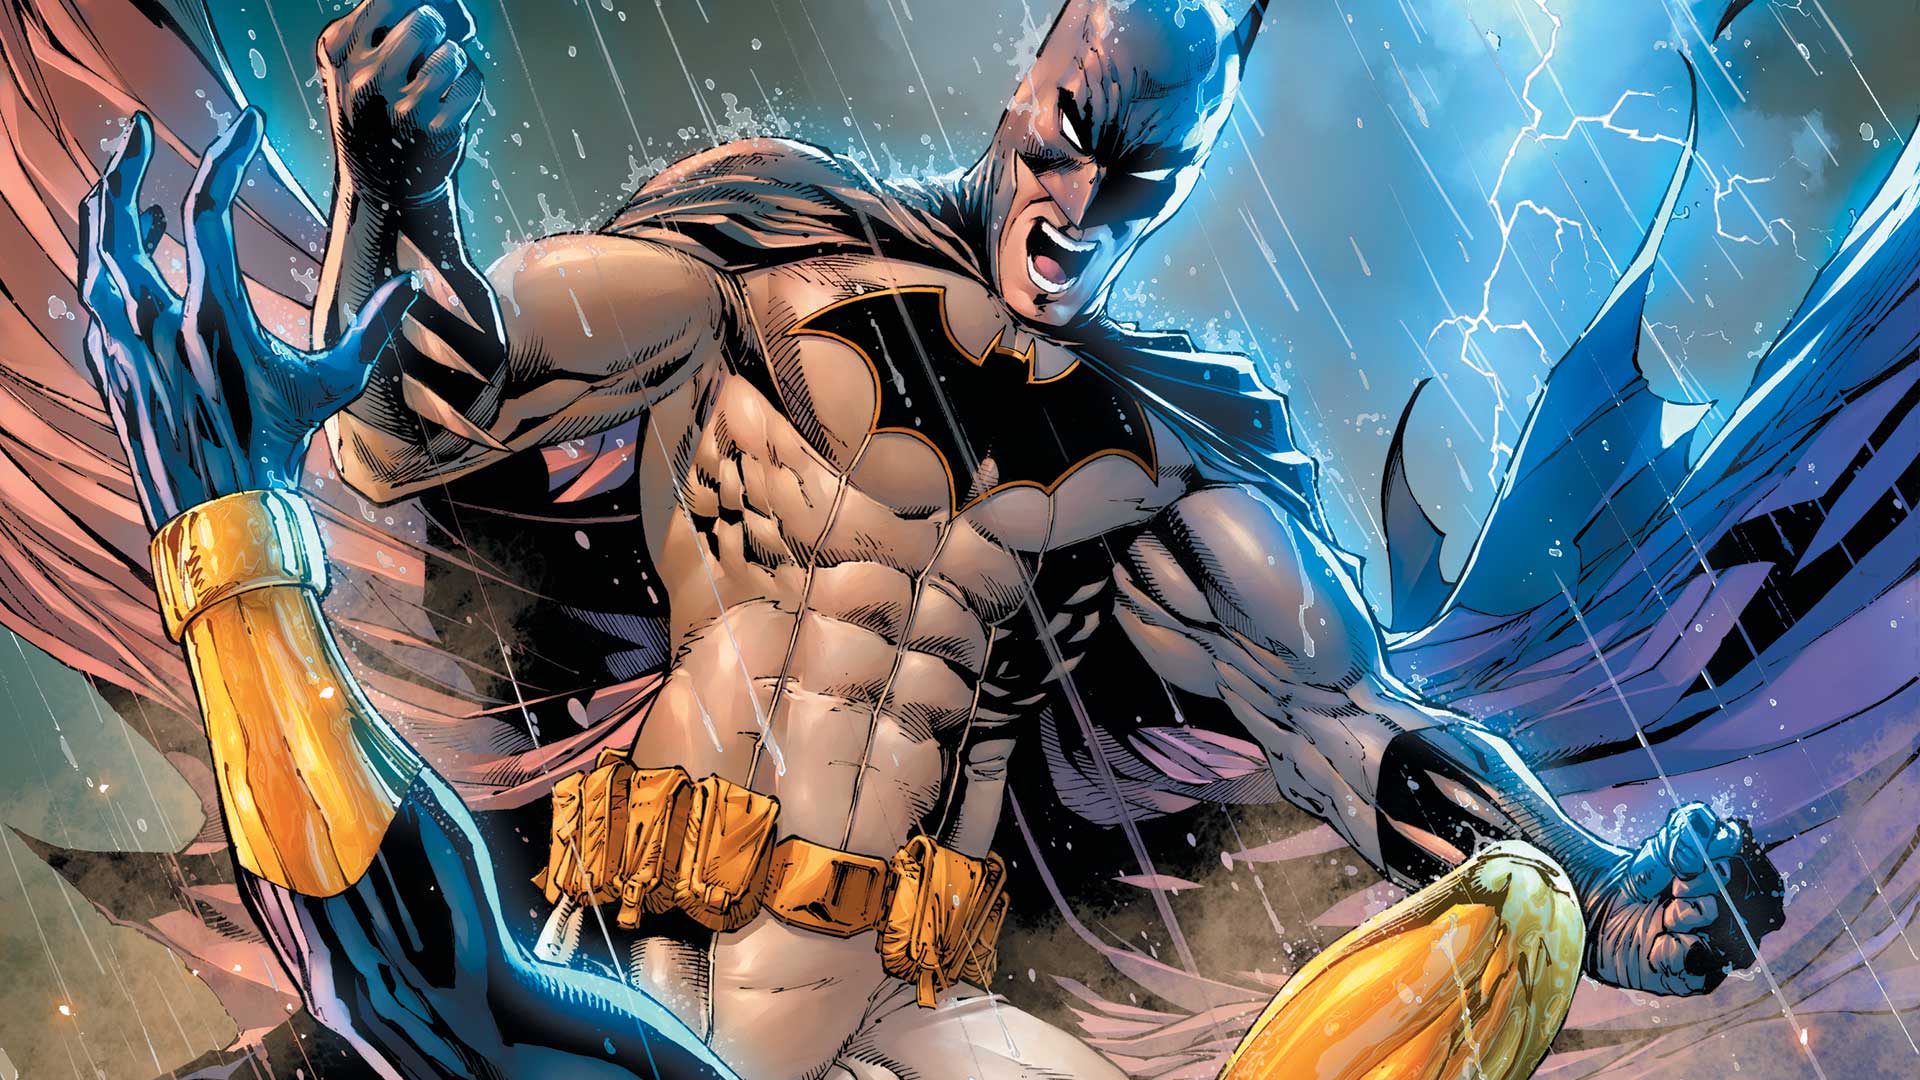 Batman #47 review: The crazy climax of Booster Gold and Bruce Wayne's bogus journey